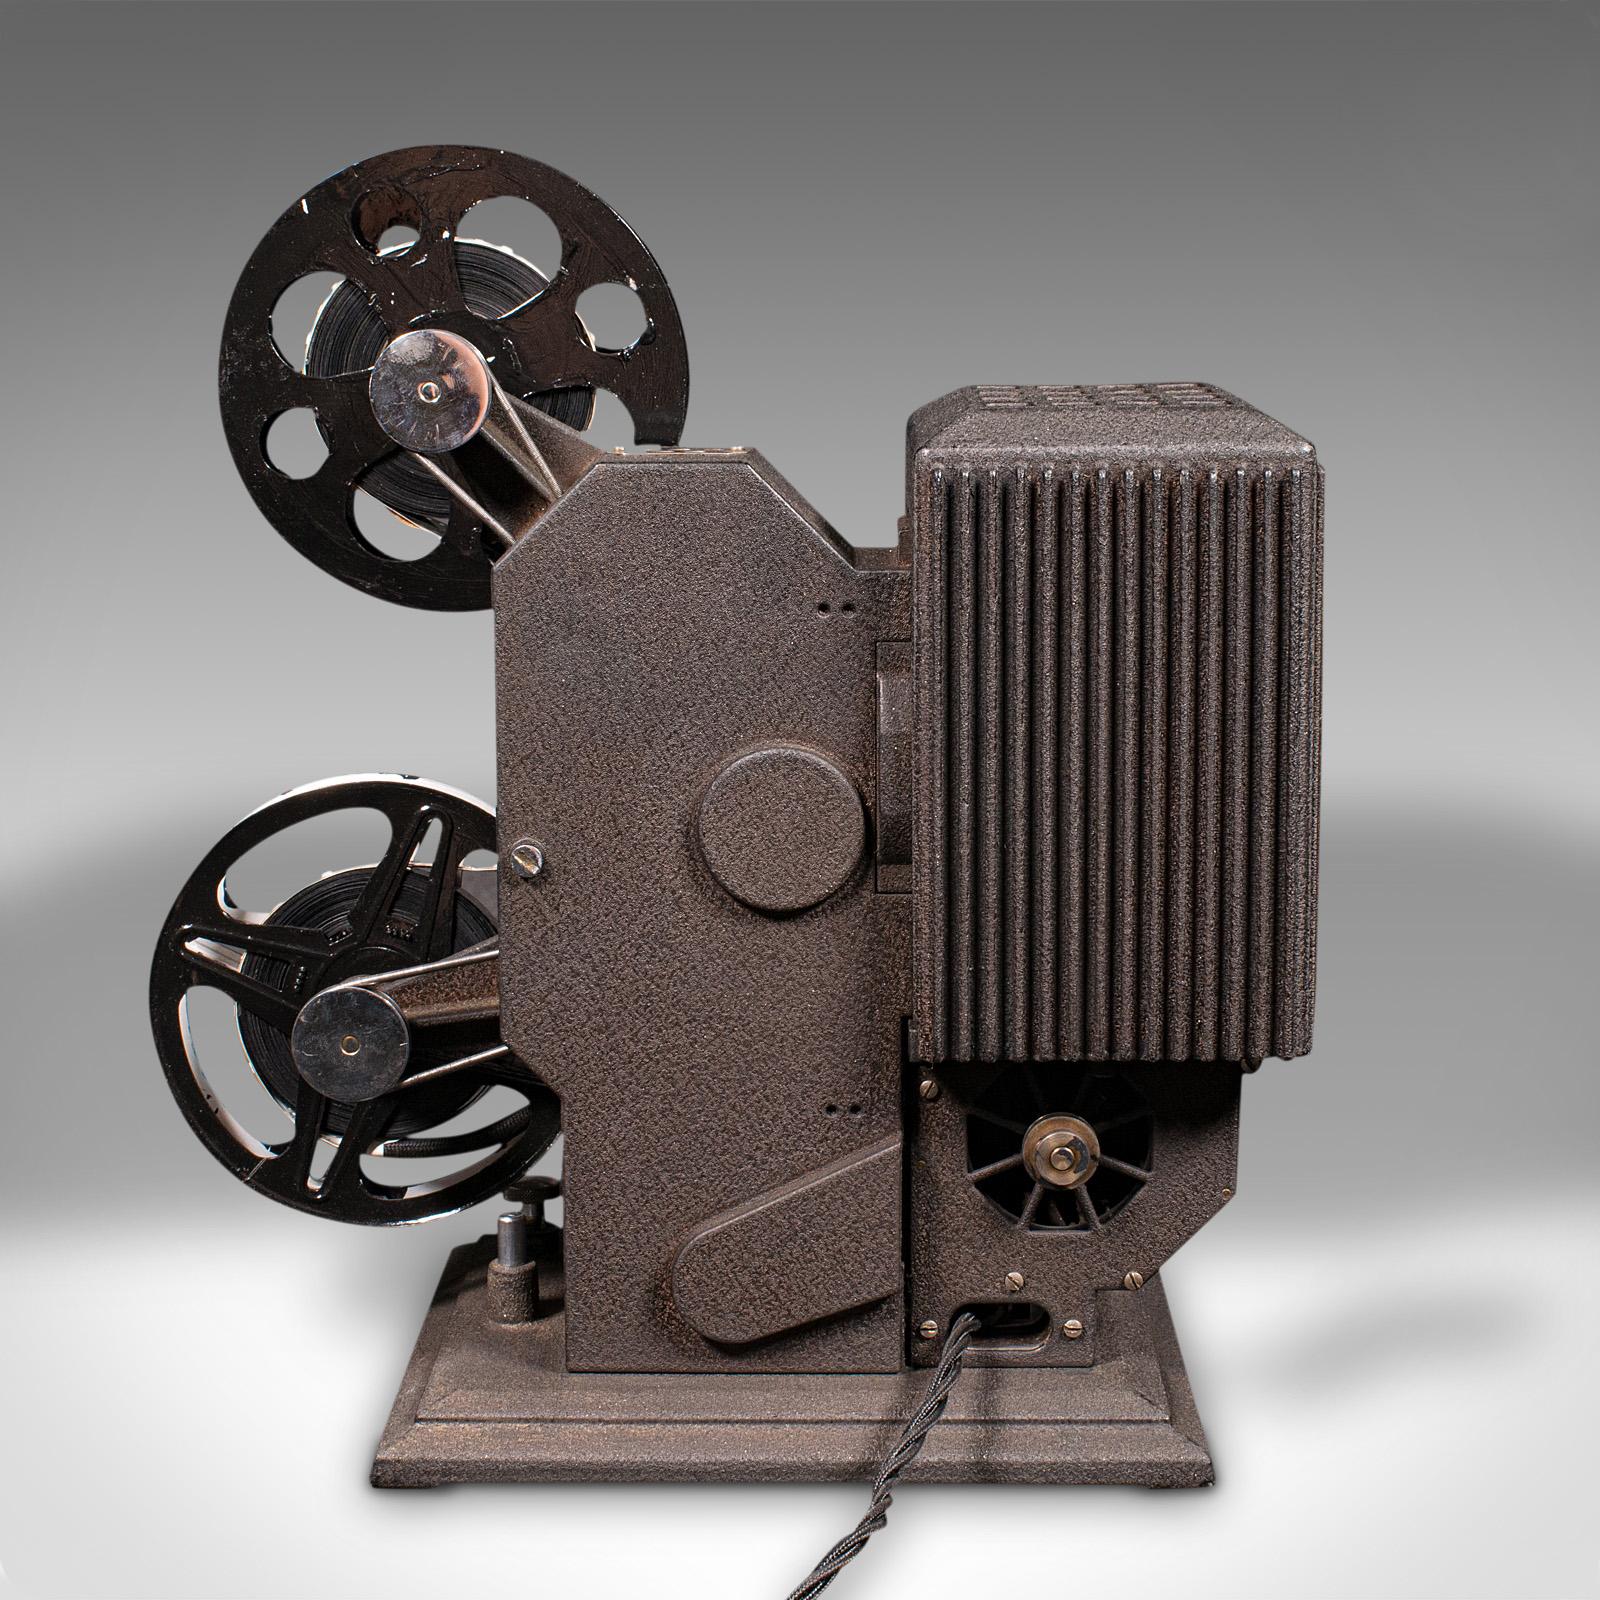 Vintage Cinema Projector Lamp, American, Converted Accent Light, Kodak, C.1940 In Good Condition For Sale In Hele, Devon, GB